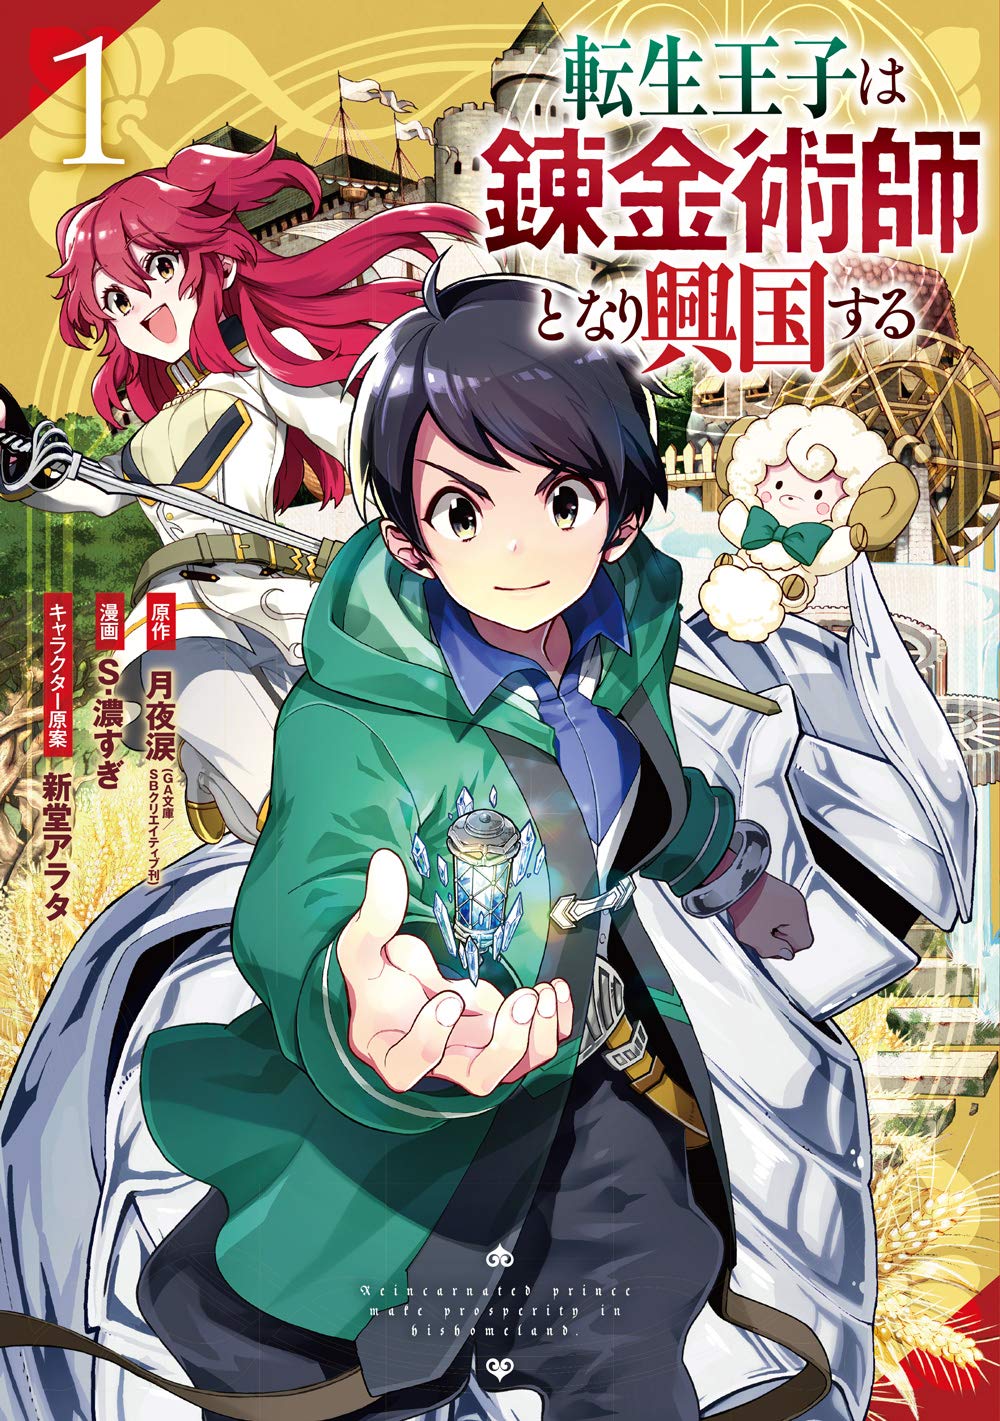 Comikey Adds Vermeil in Gold, The Angel Next Door Spoils Me Rotten,  Imperial Bride, 16 More Manga - News - Anime News Network